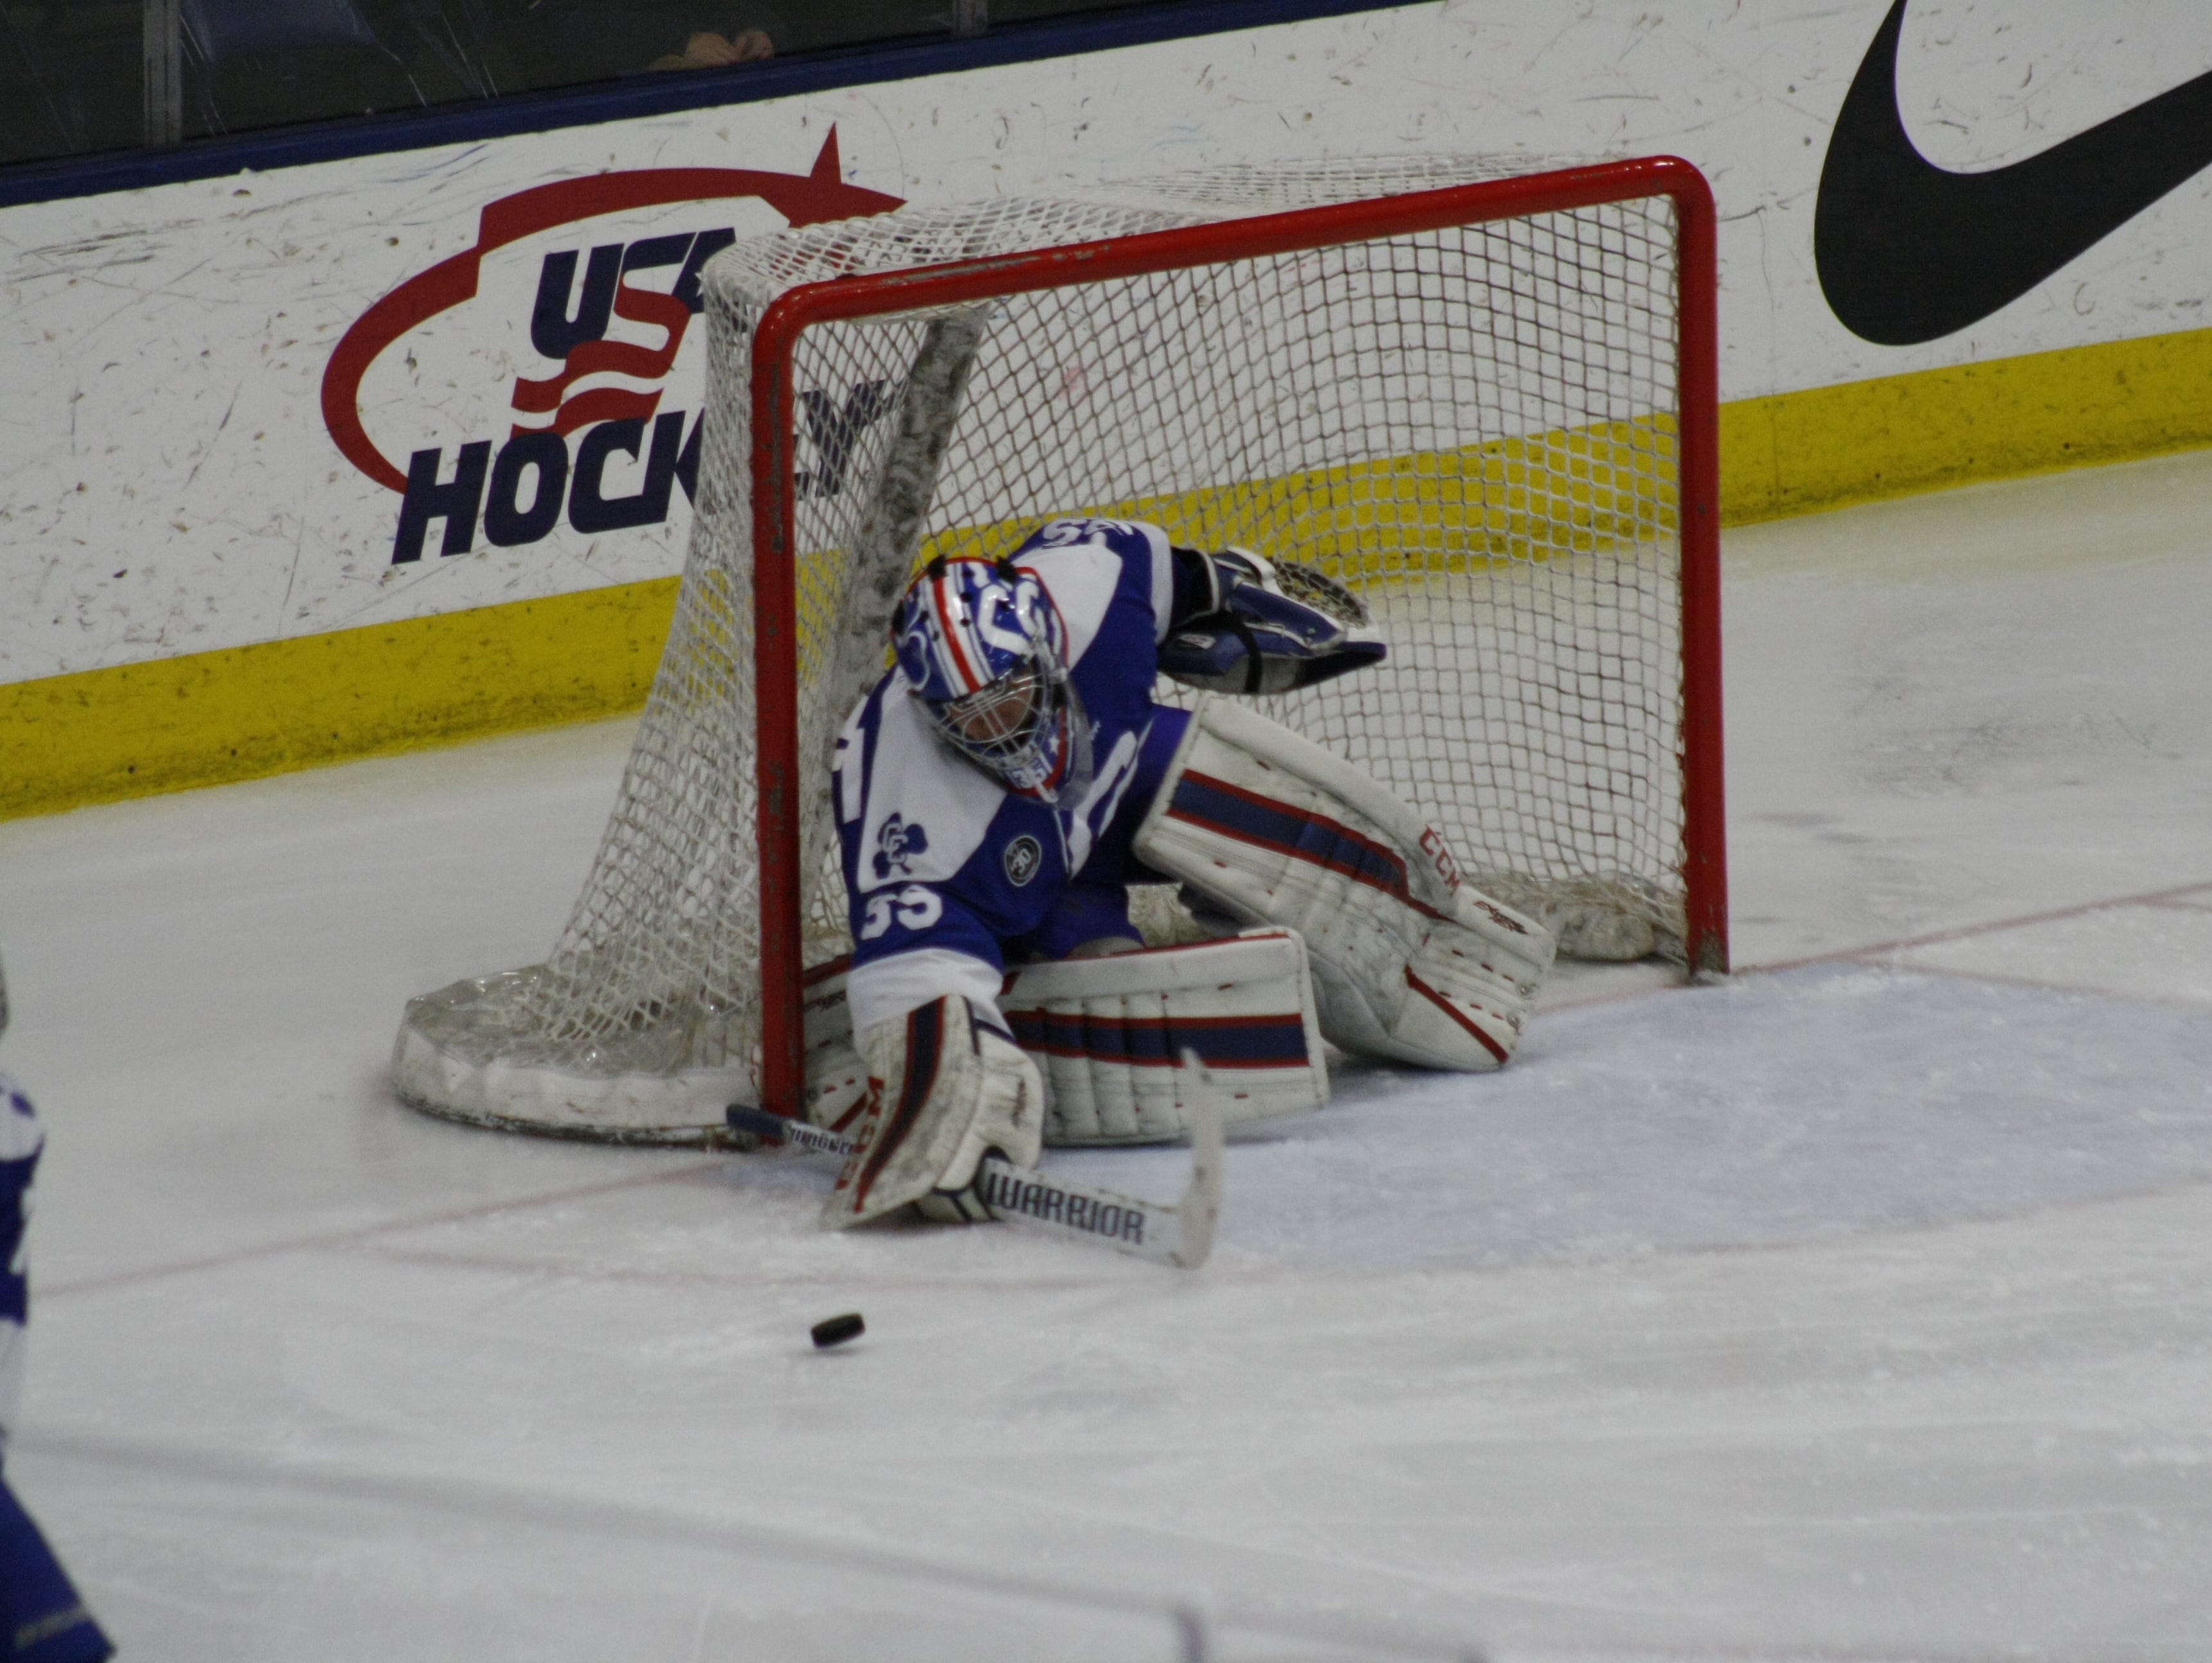 Novi Detroit Catholic Central goalie Sean Finstrom knocks away a Grandville shot during Friday's Division 1 state semifinal match at USA Hockey Arena in Plymouth.